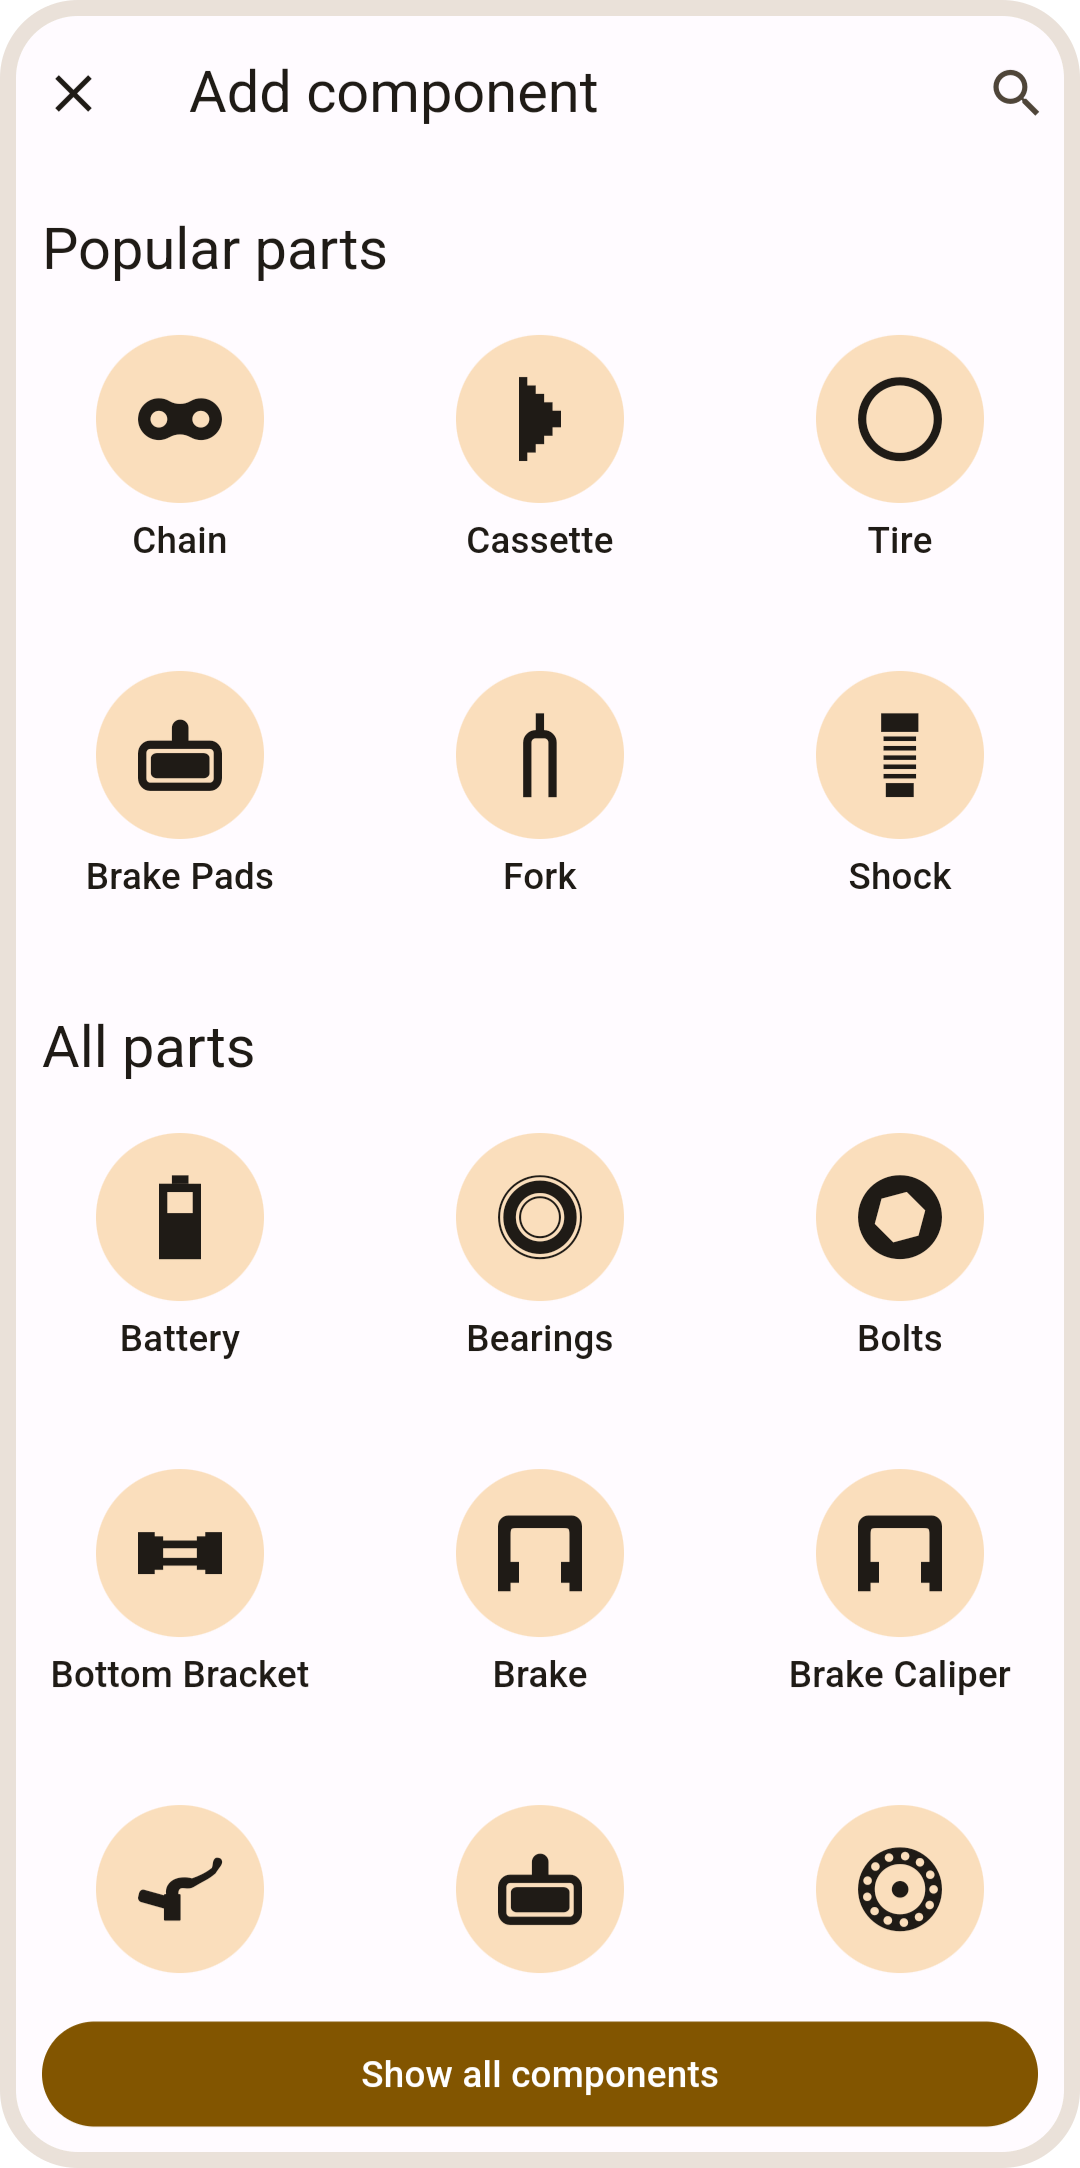 Components catalog in ProBikeGarage app